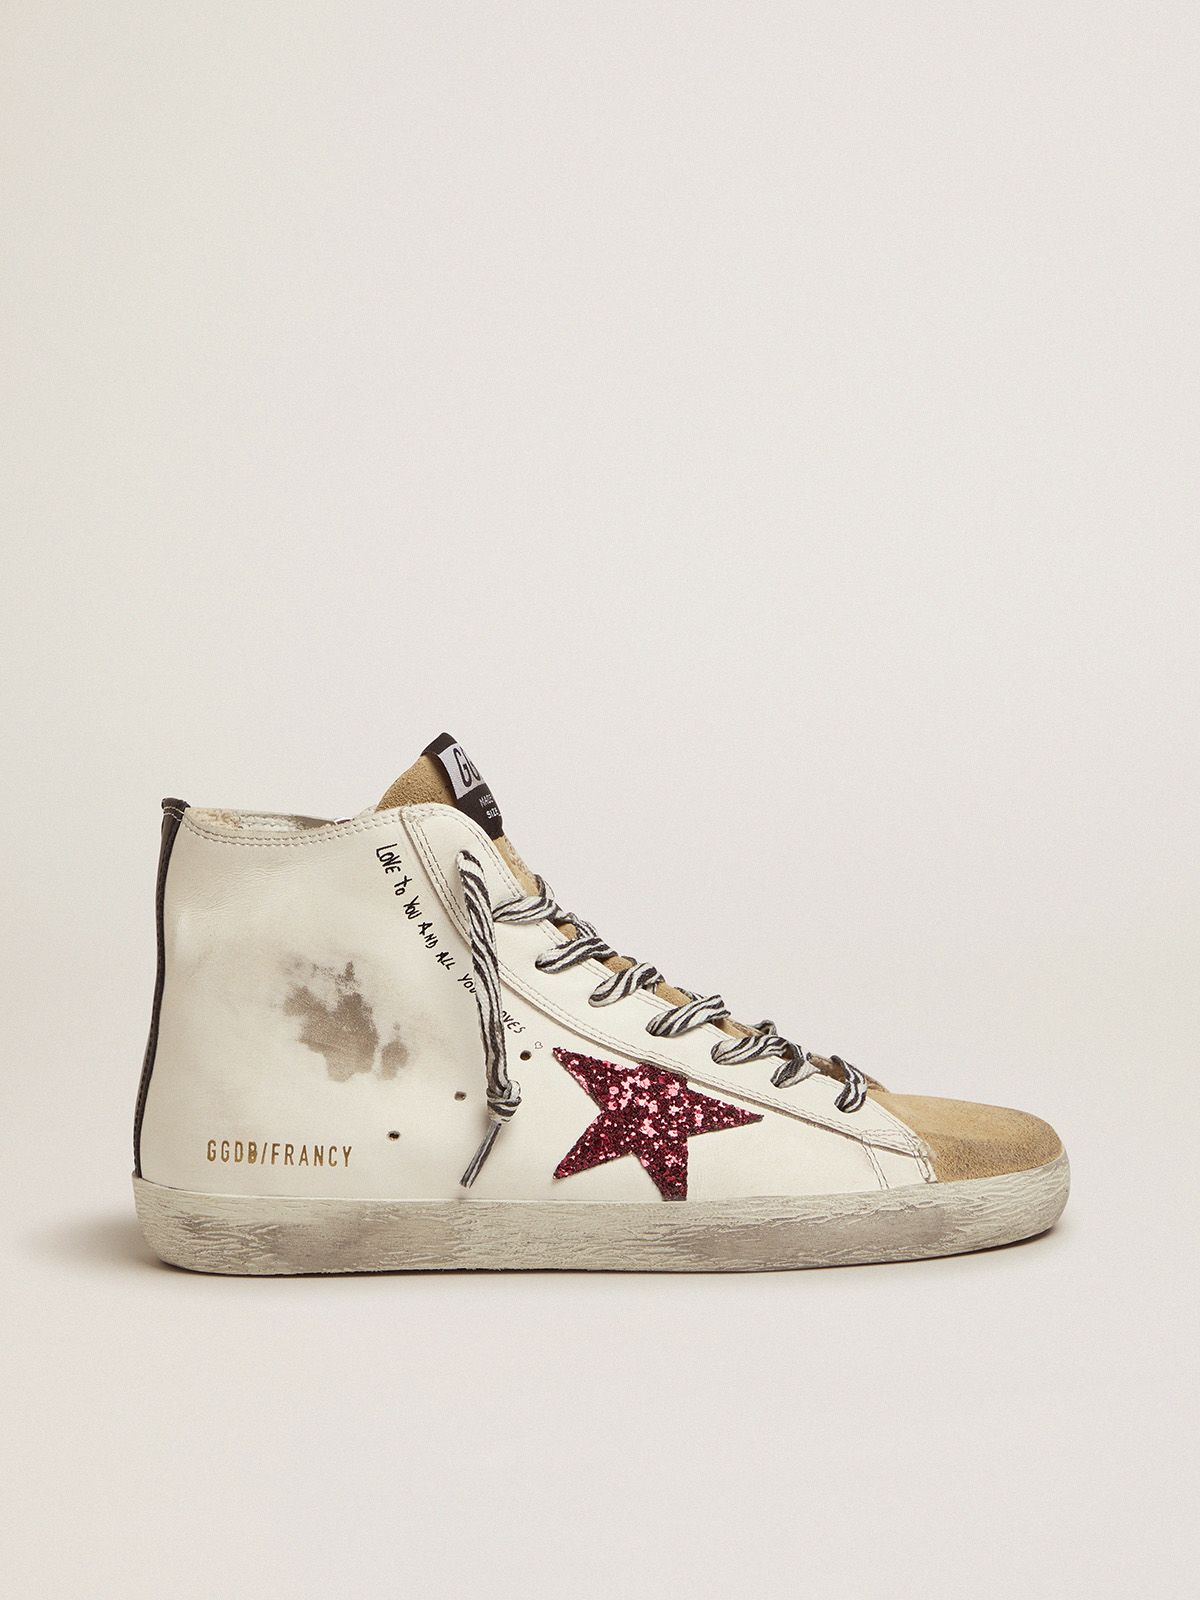 Golden Goose Uomo Saldi Francy sneakers with red glittery star and handwritten lettering